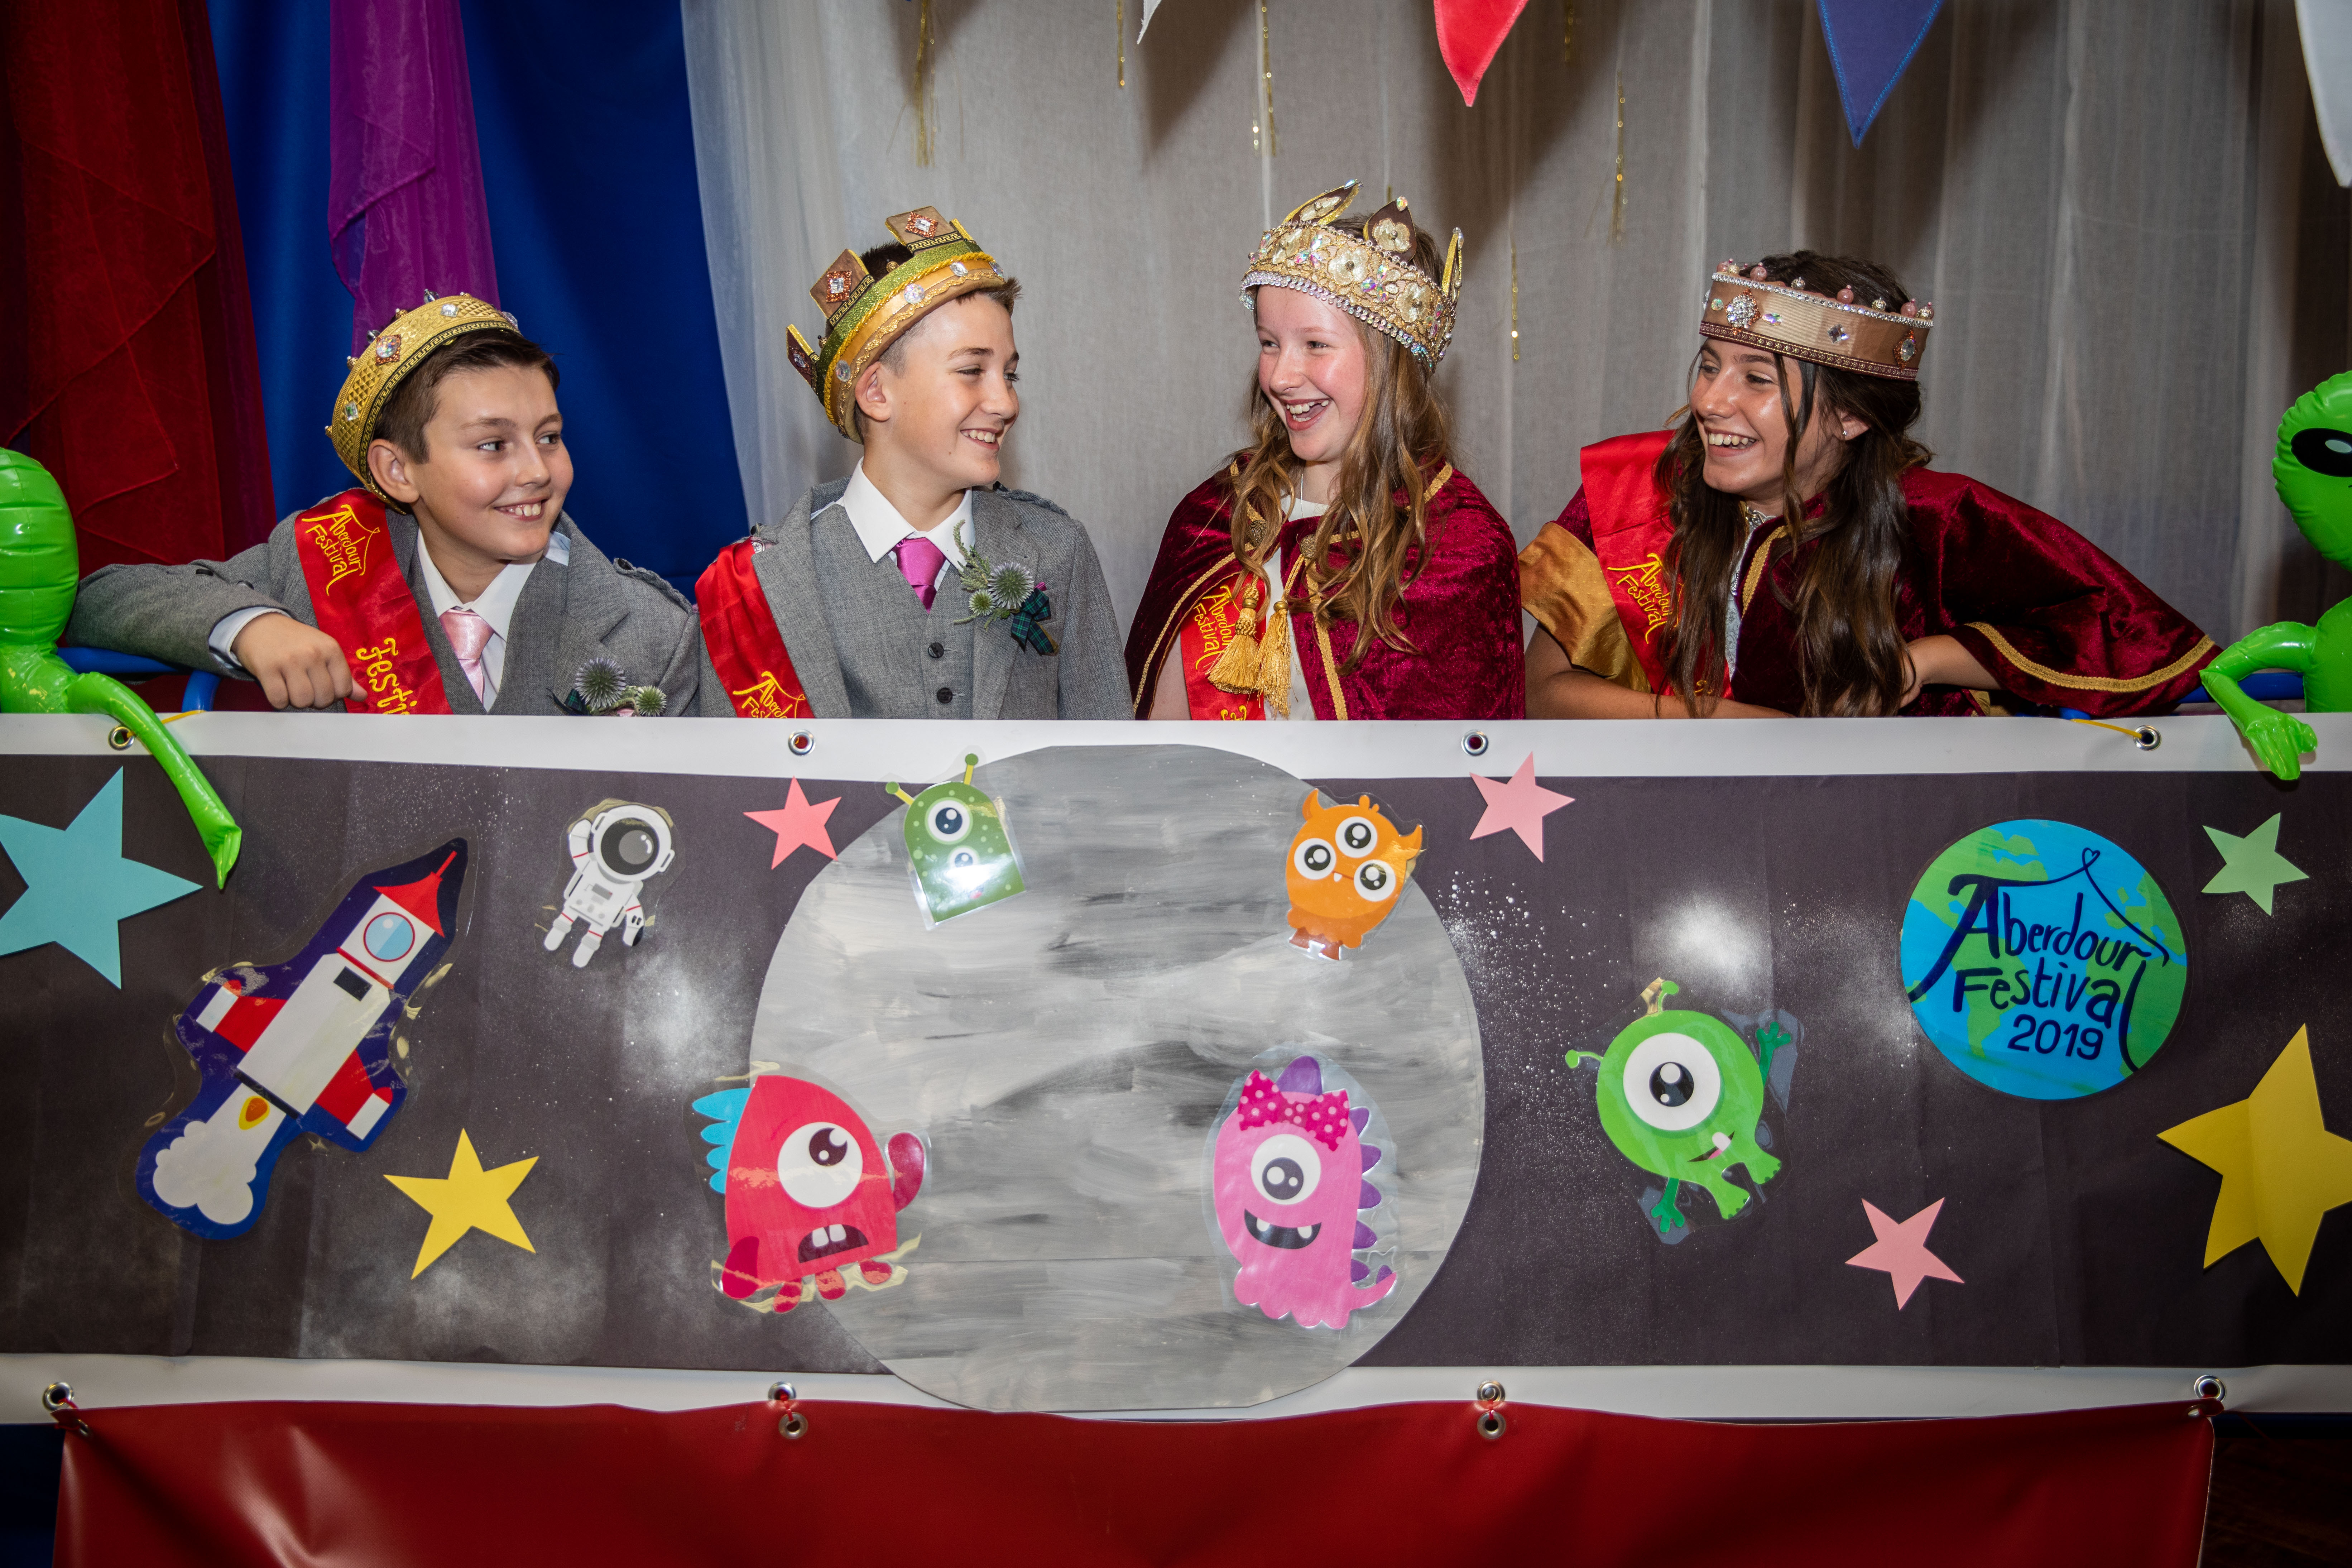 Aberdour Festival's royal party, from left: Jack Ross, 11, Sam Connolly, 11, Natalie Angus, 12, and Olivia Byrne, 12.